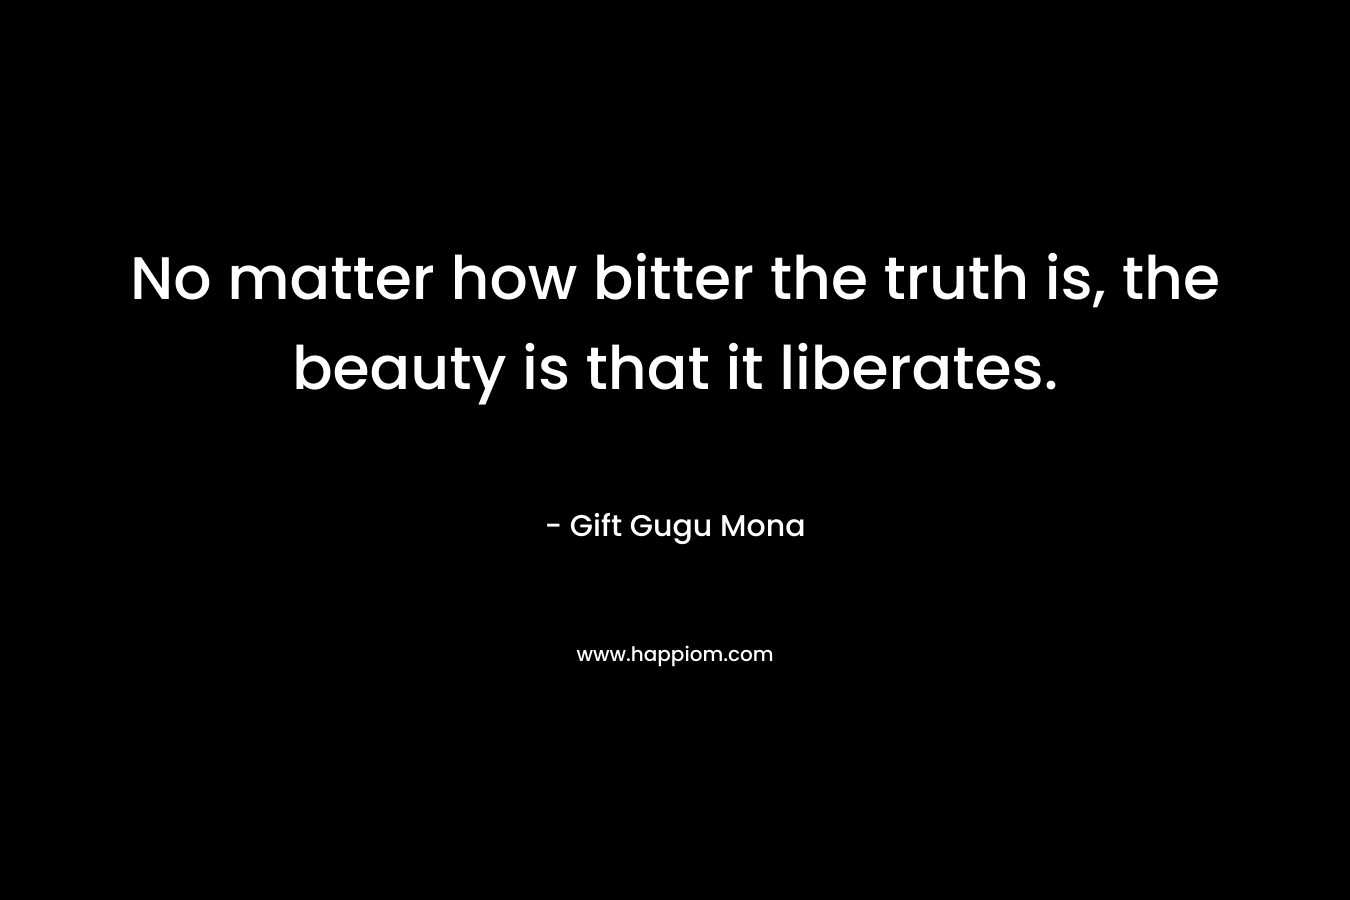 No matter how bitter the truth is, the beauty is that it liberates. – Gift Gugu Mona